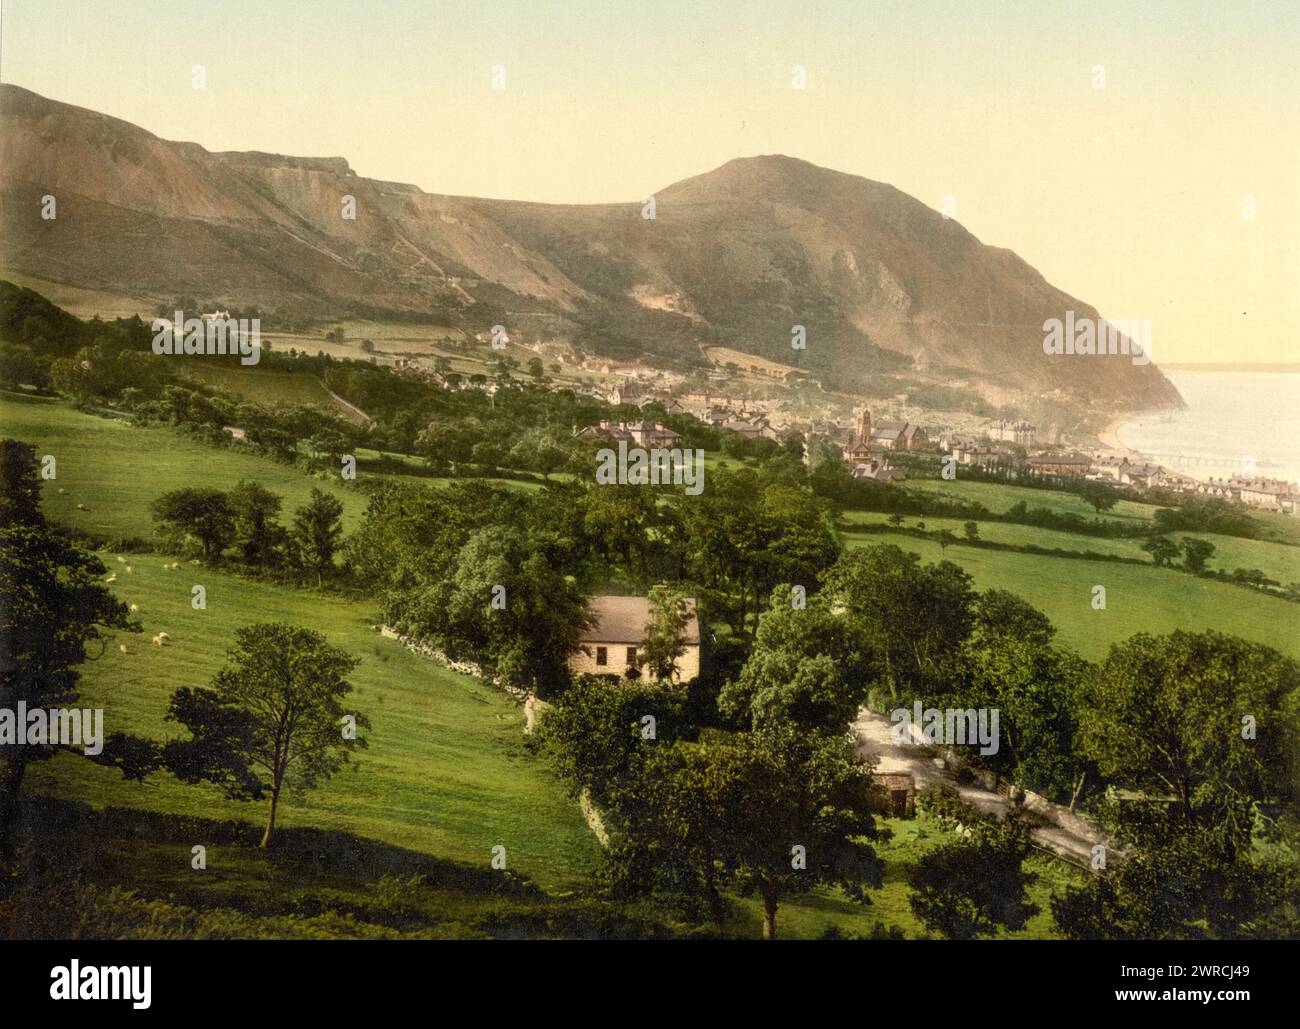 General view, Penmaenmawr, Wales, between ca. 1890 and ca. 1900., Wales, Penmaenmawr, Color, 1890-1900 Stock Photo